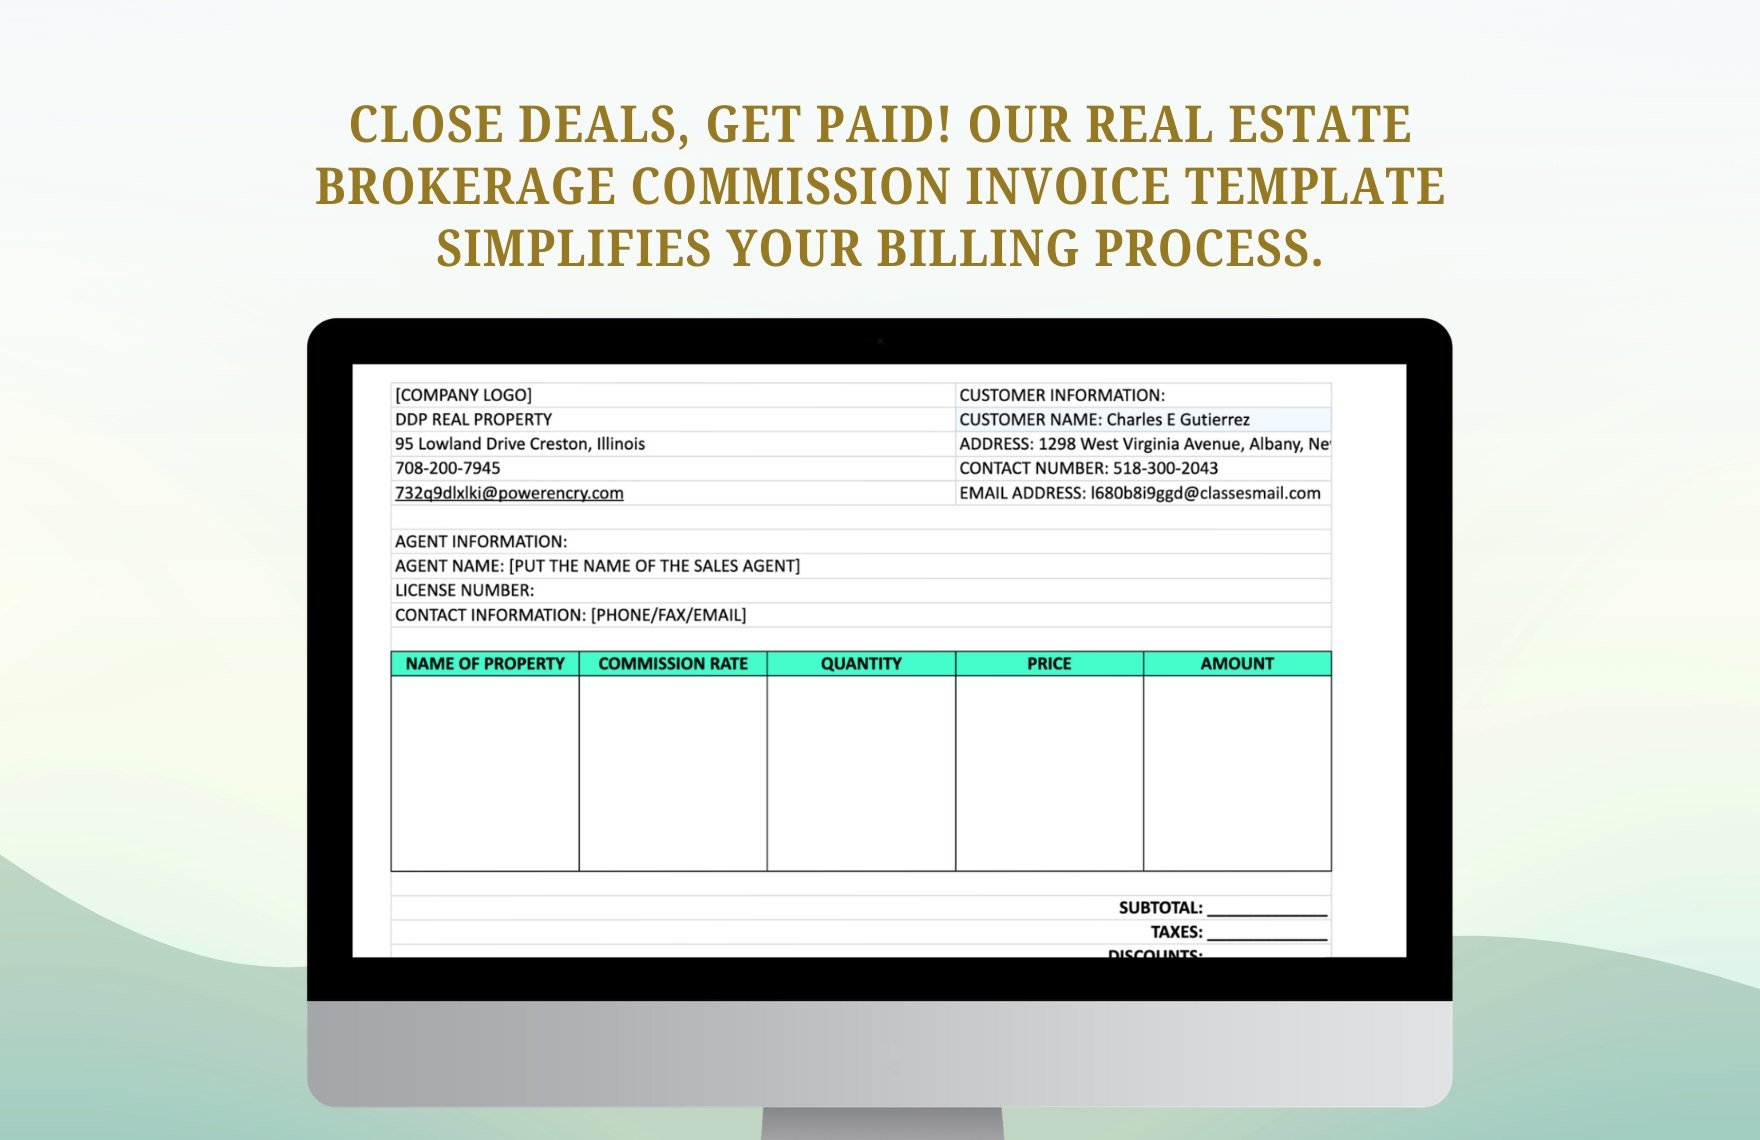 Real Estate Brokerage Commission Invoice Template